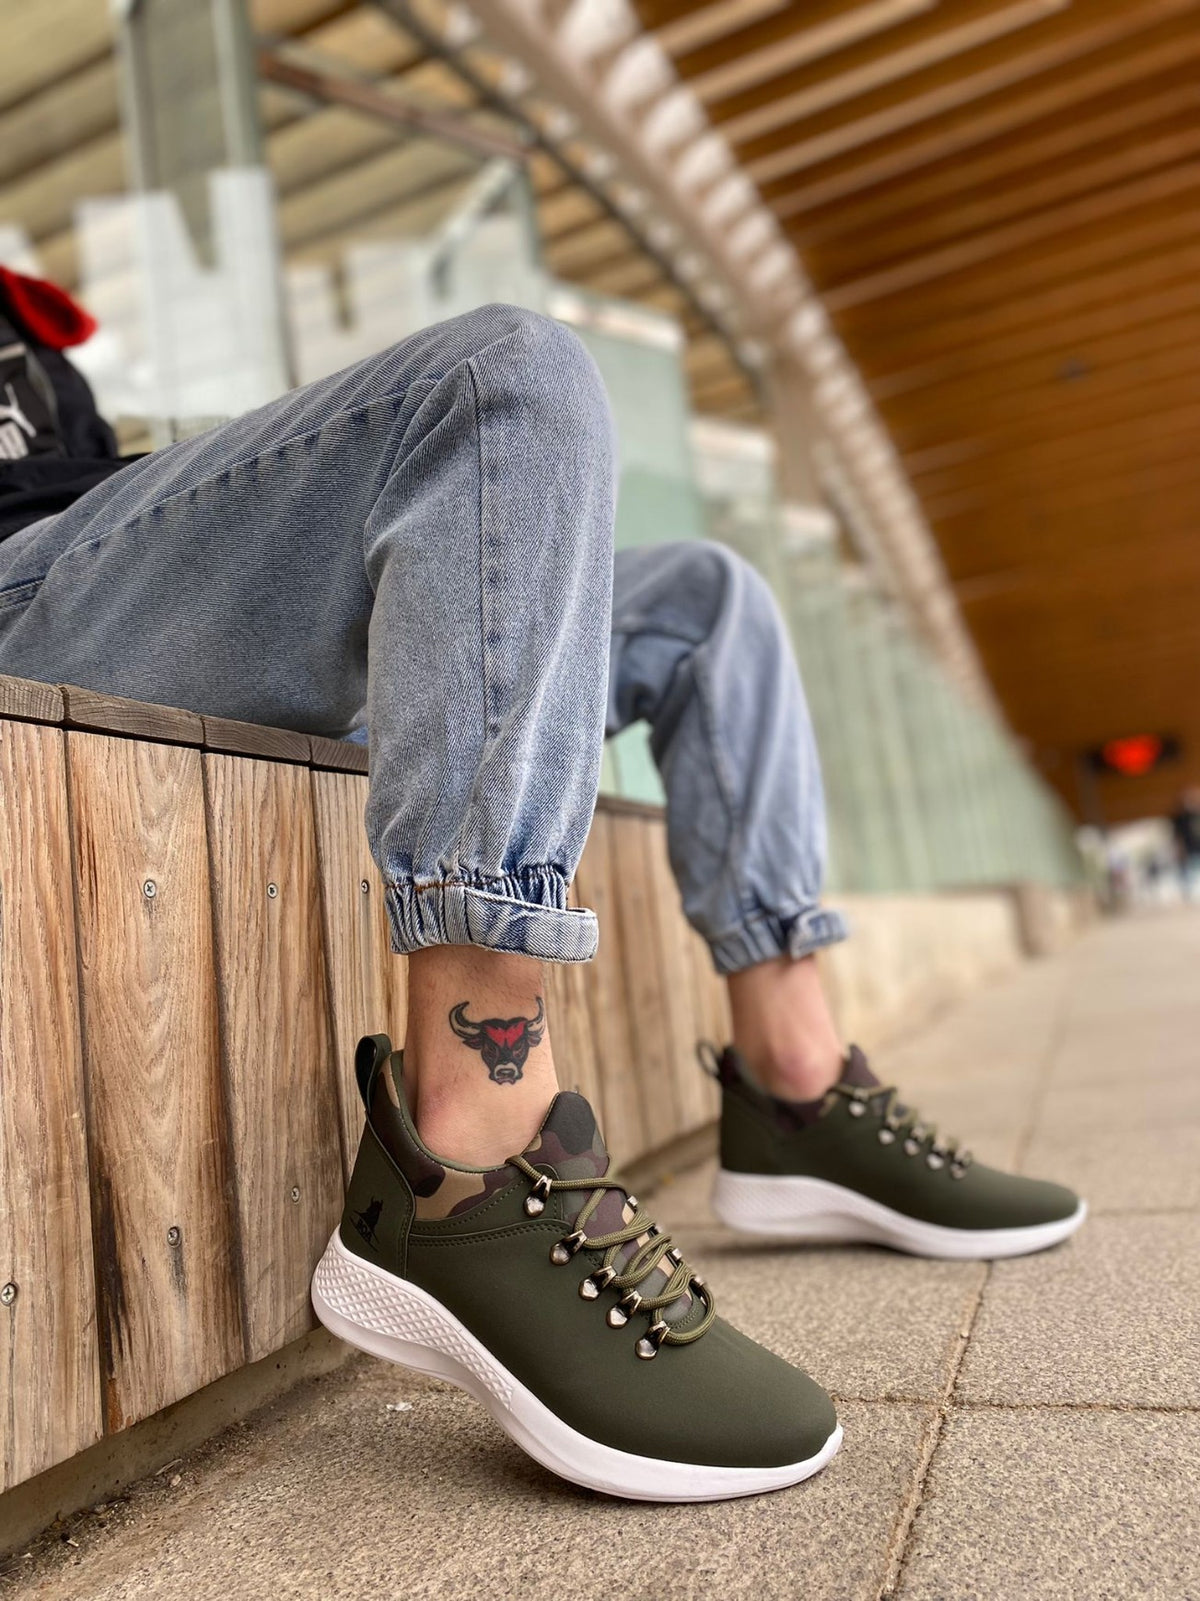 BA0601 Lace-up Comfortable High Sole Khaki camouflage Casual Men's Sneakers - STREETMODE™